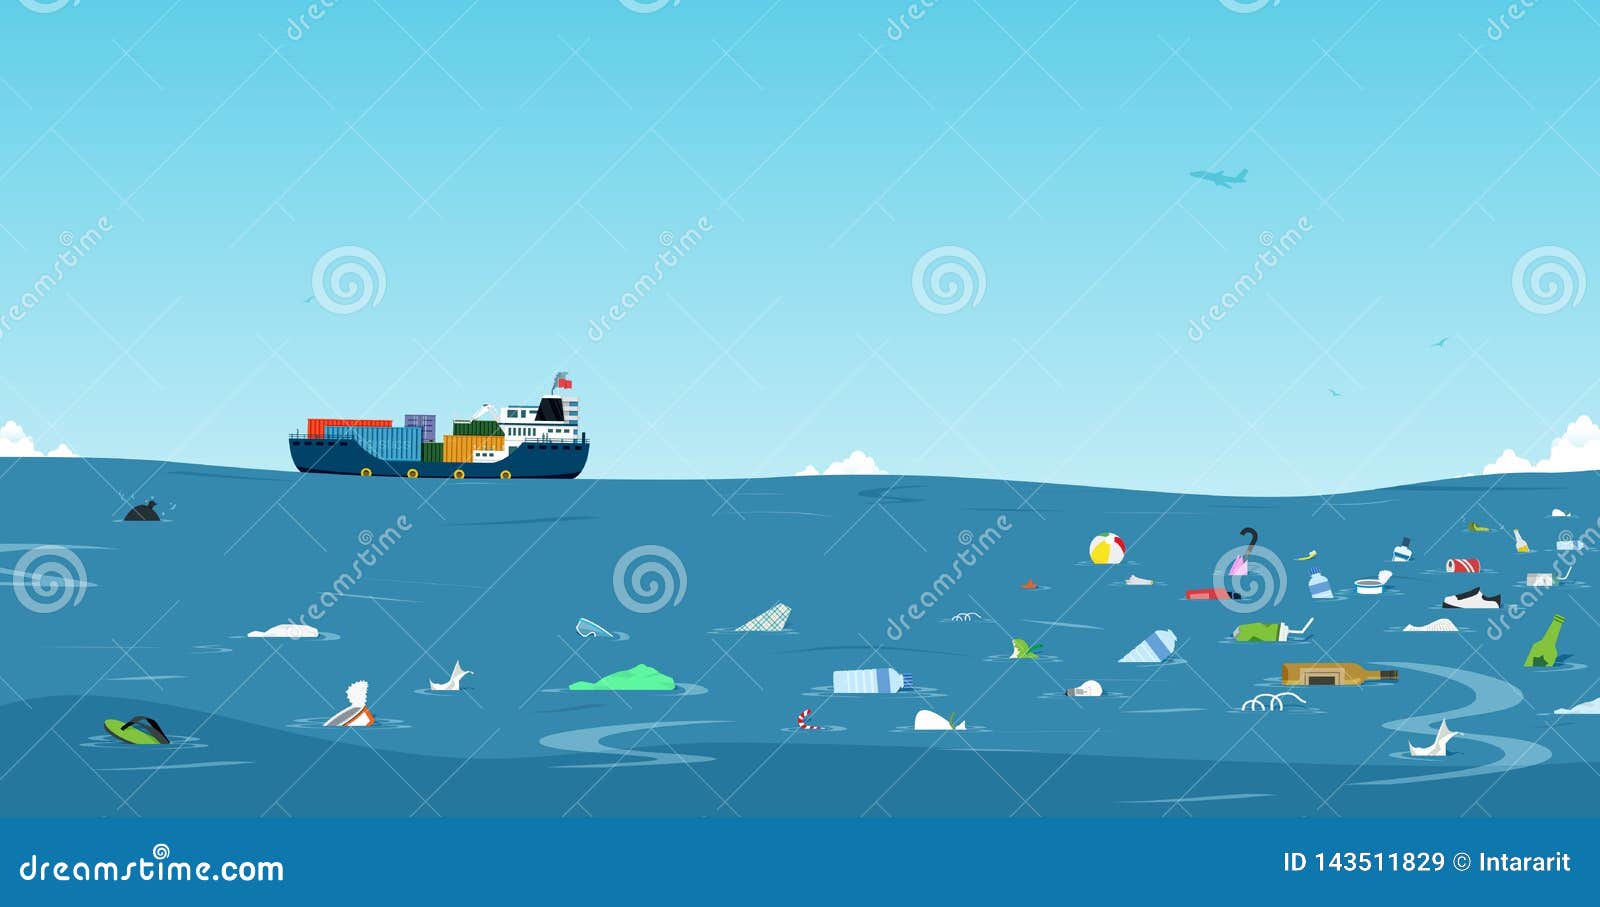 Garbage in the sea stock vector. Illustration of nature - 143511829